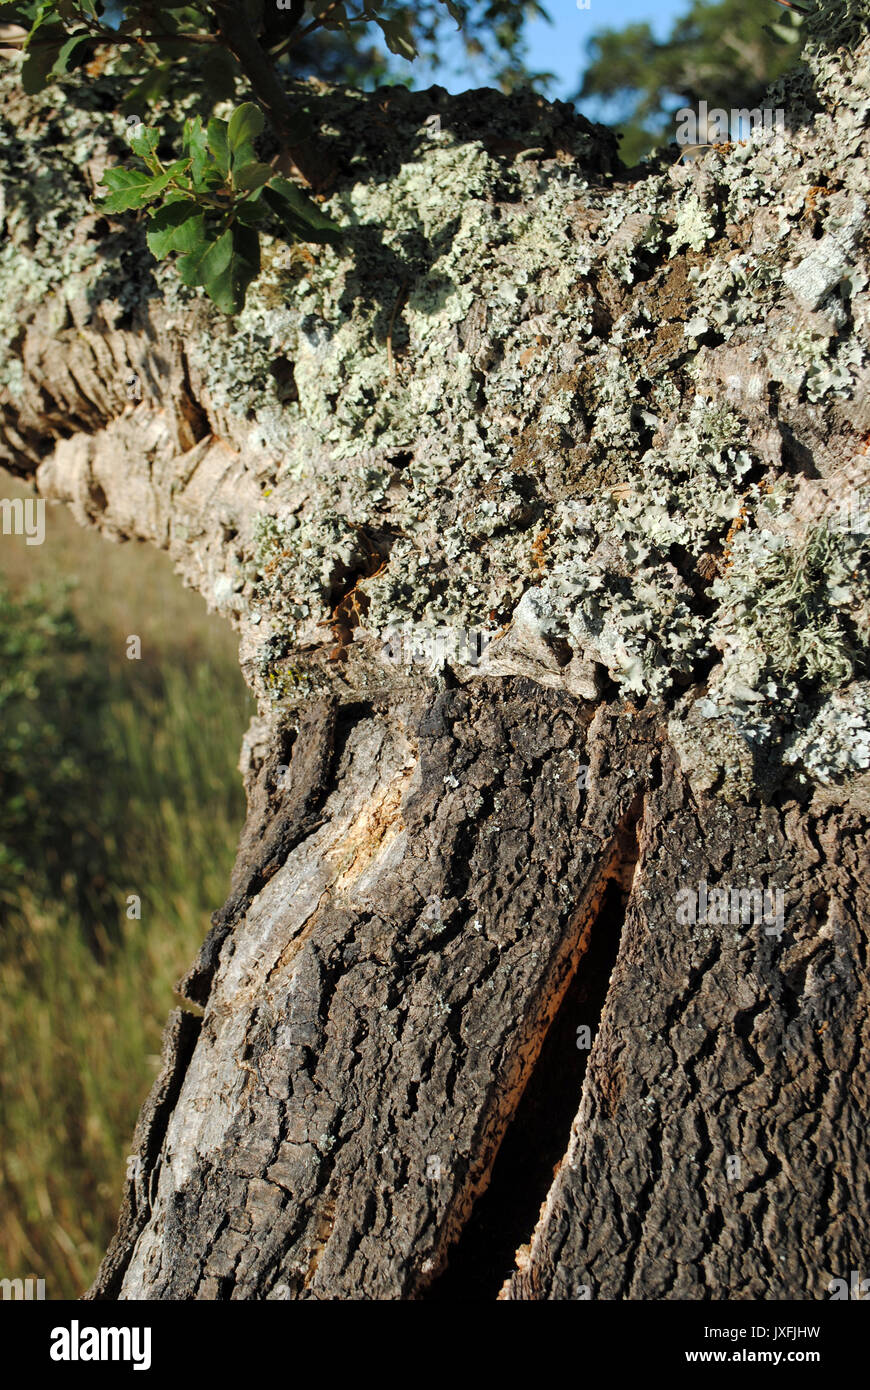 A close-up of a stripped cork oak tree (Quercus suber) in the Alentejo region, Portugal. Stock Photo